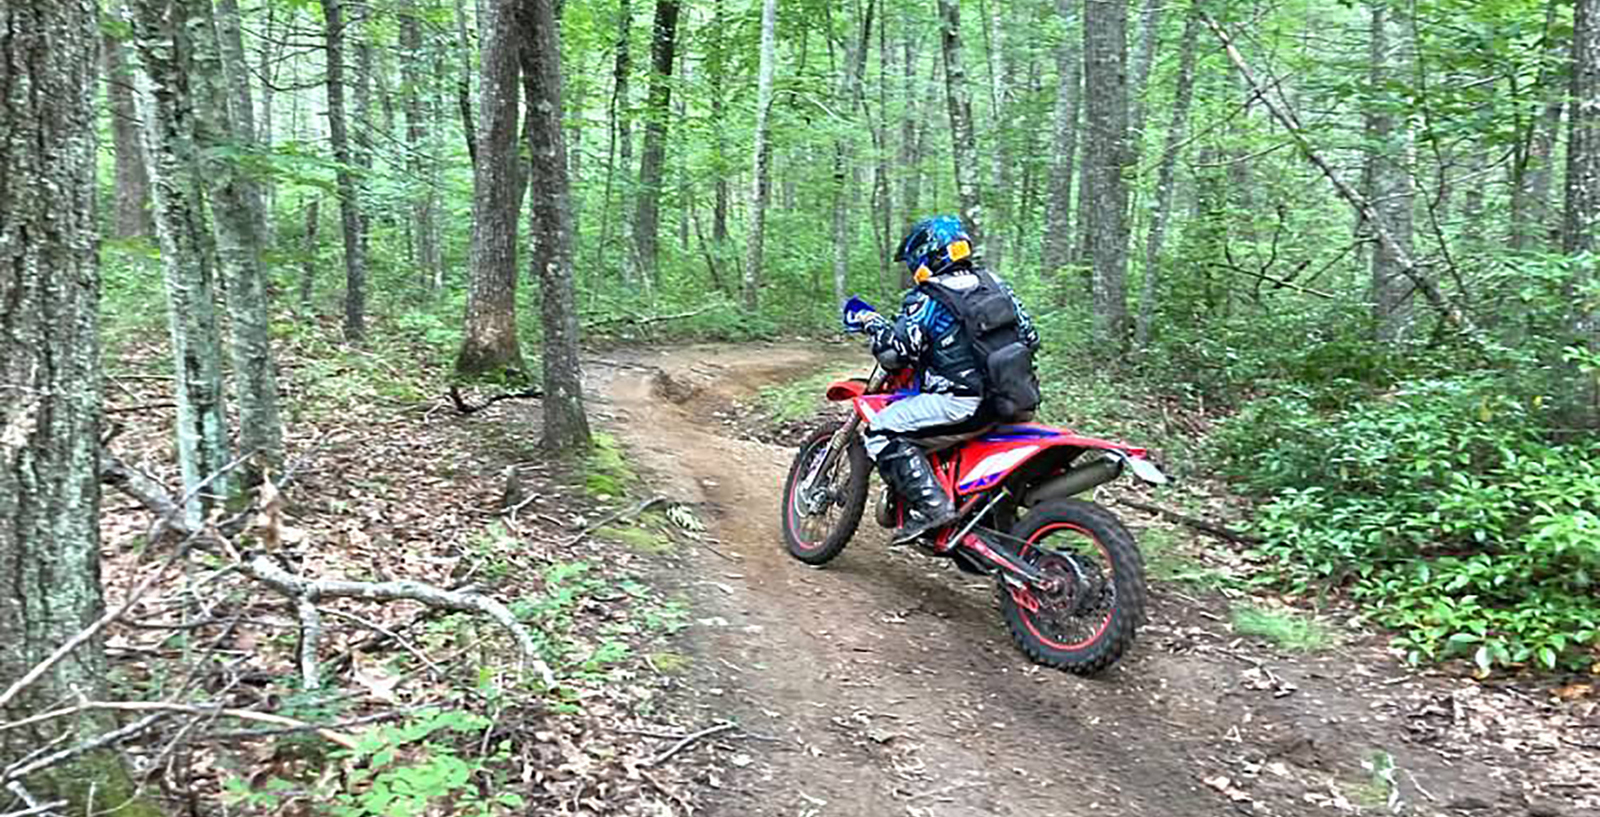 Motorcycle Group Given Special Permission to Race Through Big River Management Area - ecoRI news